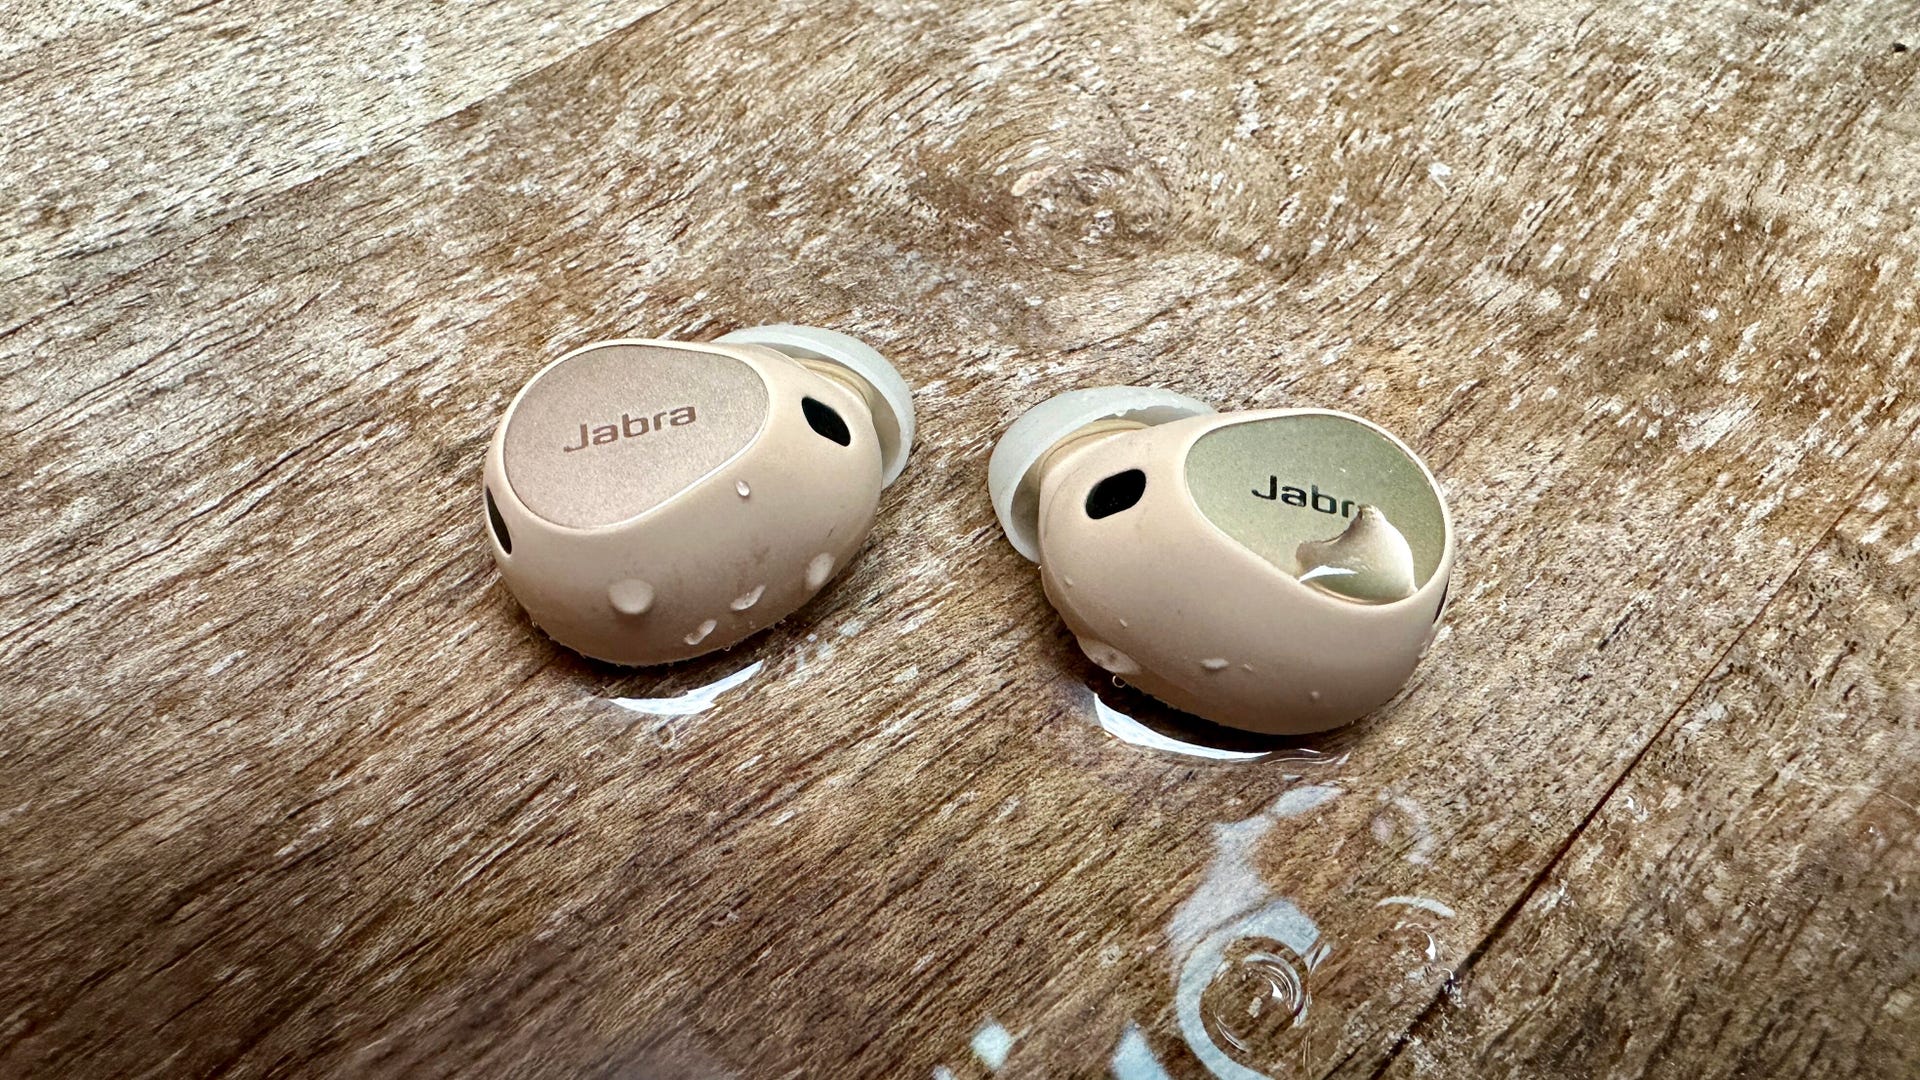 The Jabra Elite 10 can be fully submerged in water